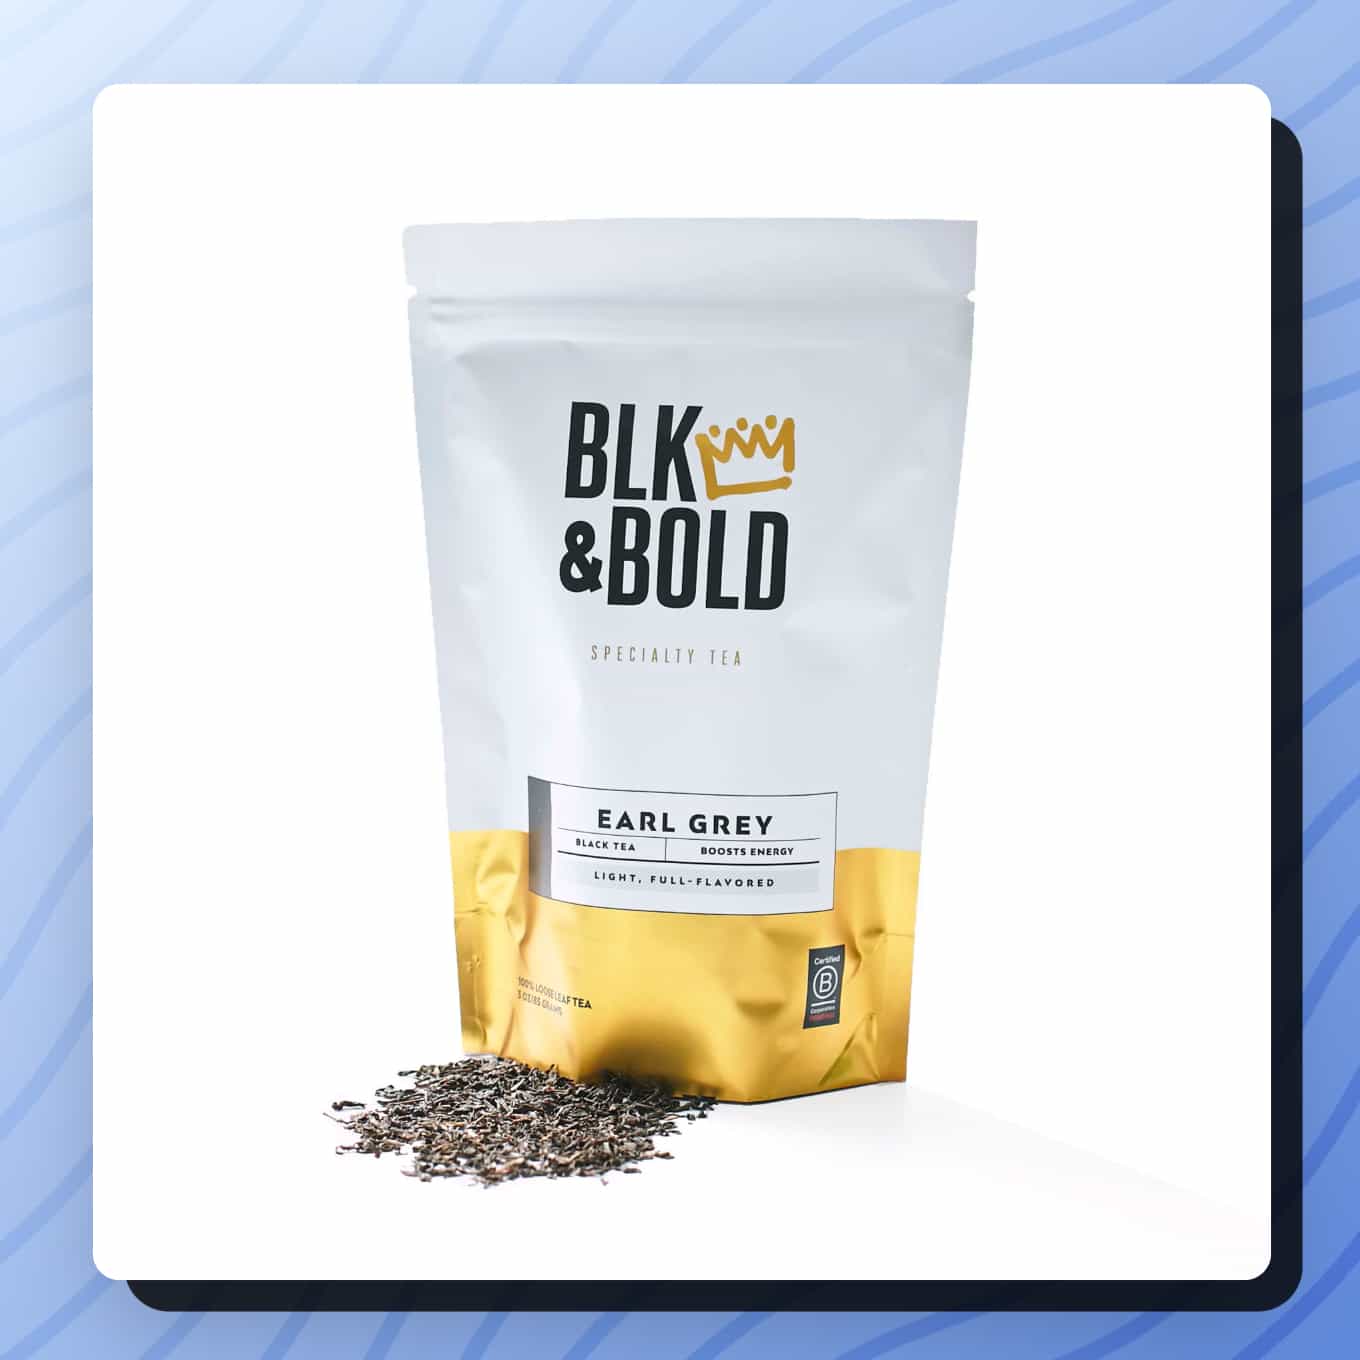 Bag of earl grey tea from Blk & Bold